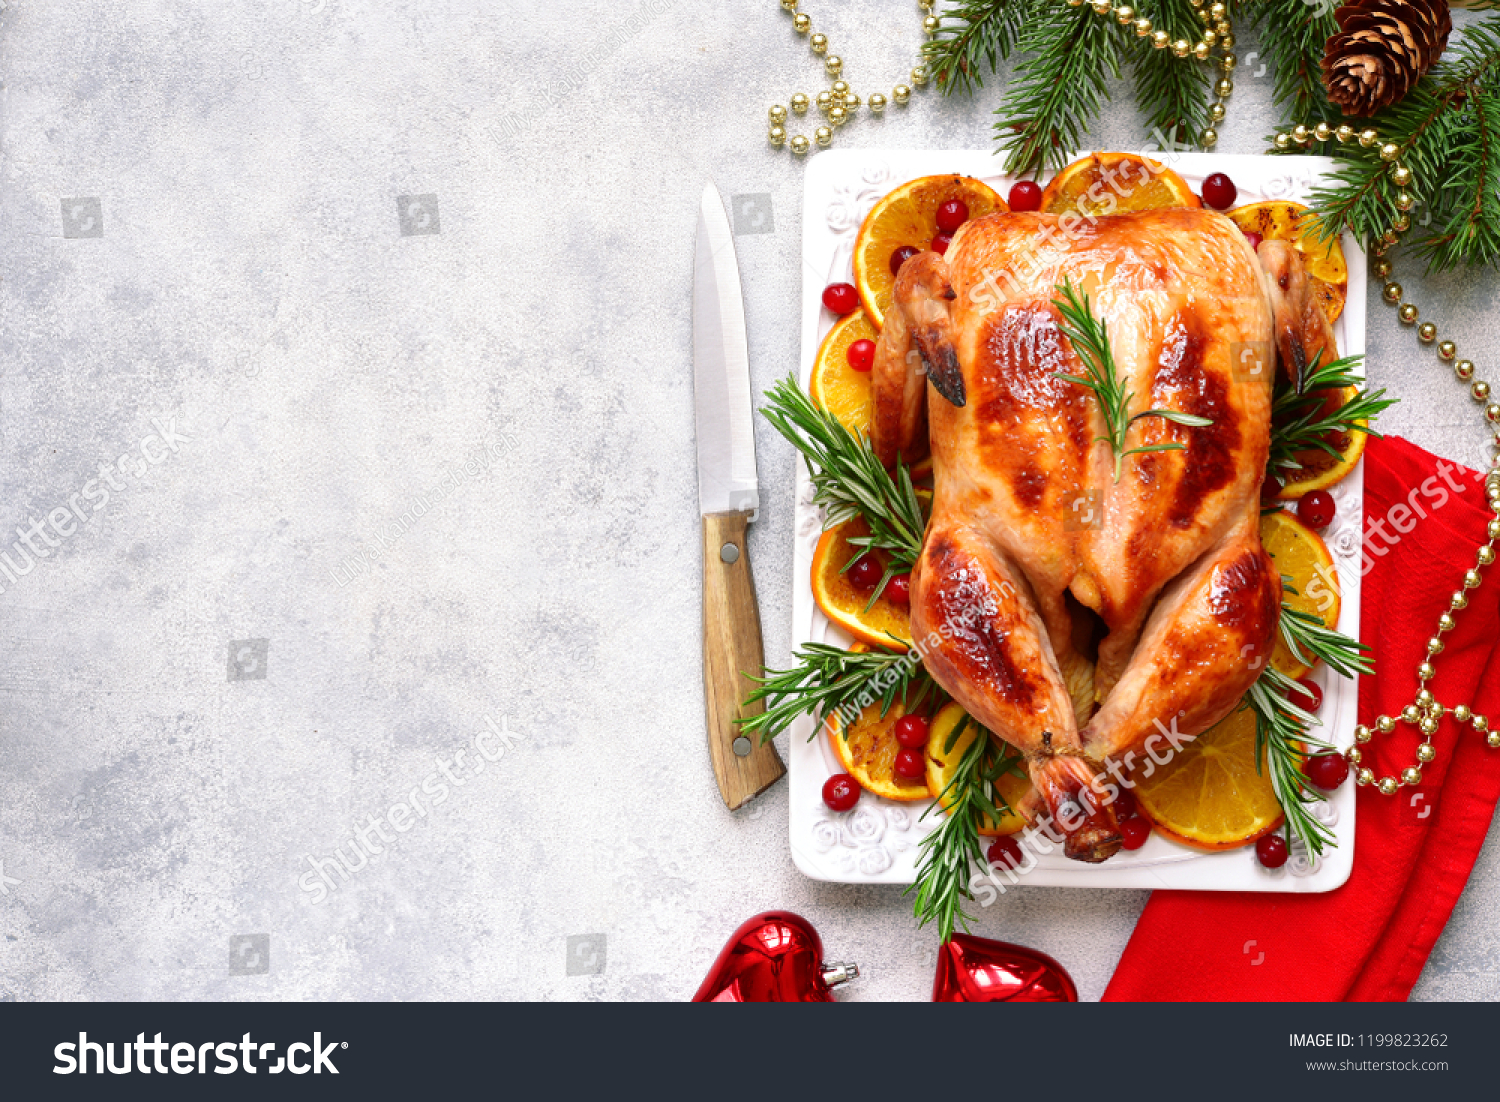 Roasted chicken with oranges , rosemary and cranberries  on a white plate over light slate, stone or concrete background.Top view with copy space. #1199823262